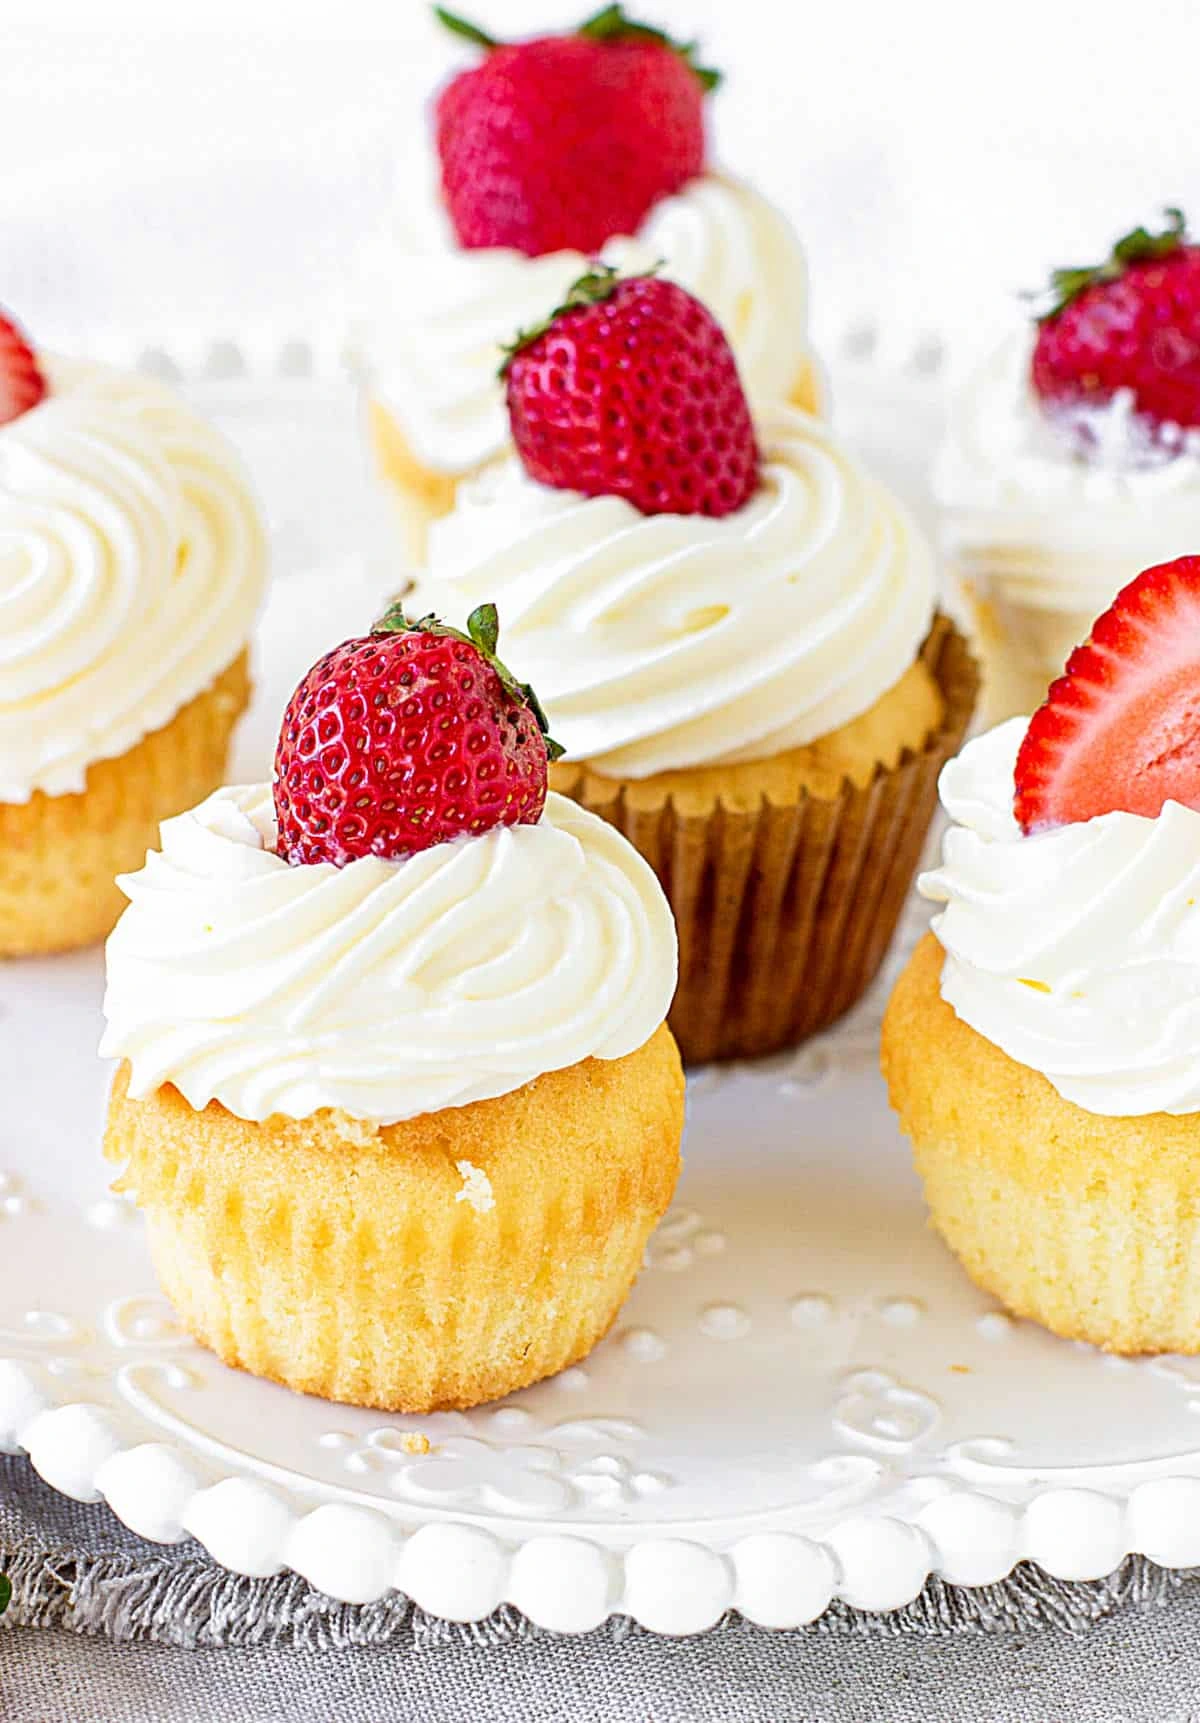 Strawberry Shortcake Cupcakes with cream and strawberry on top